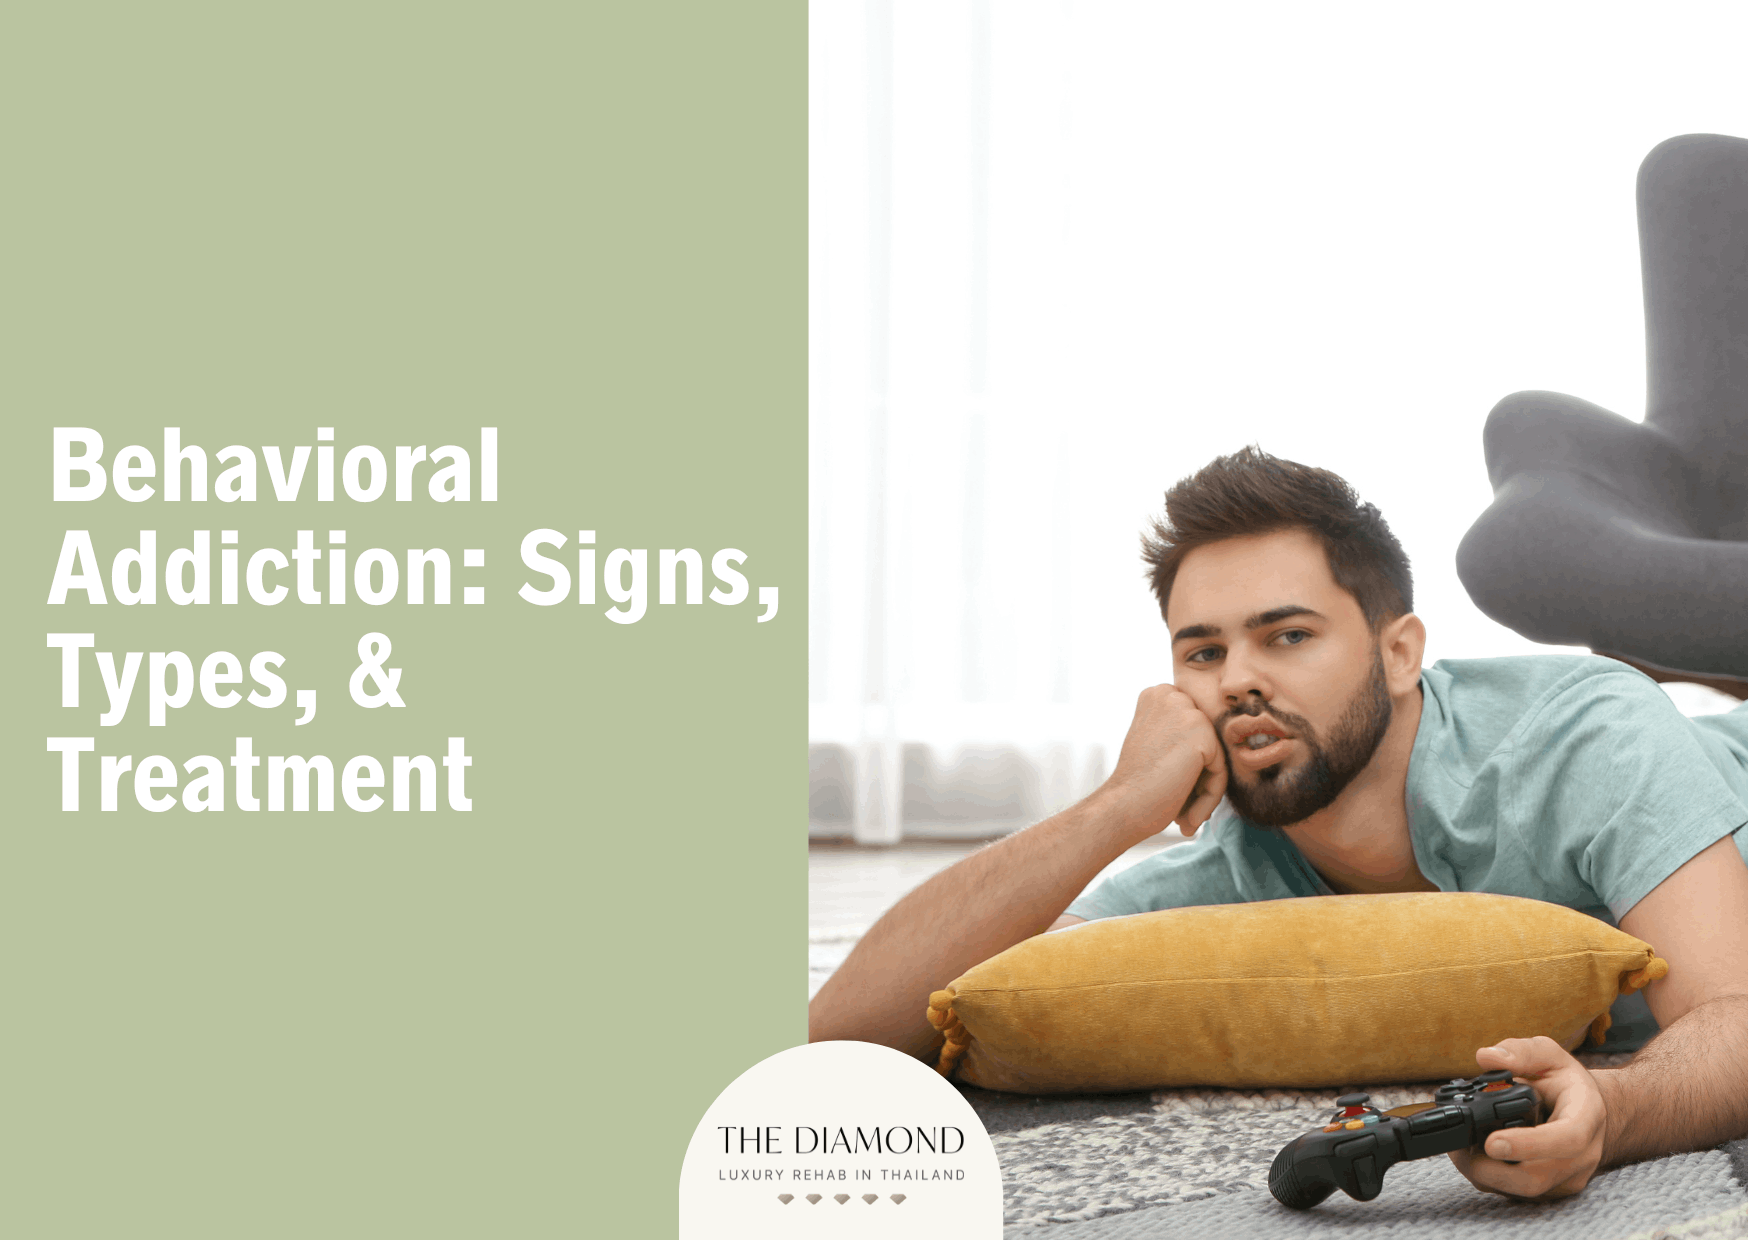 Behavioral addiction: signs, types, and treatment